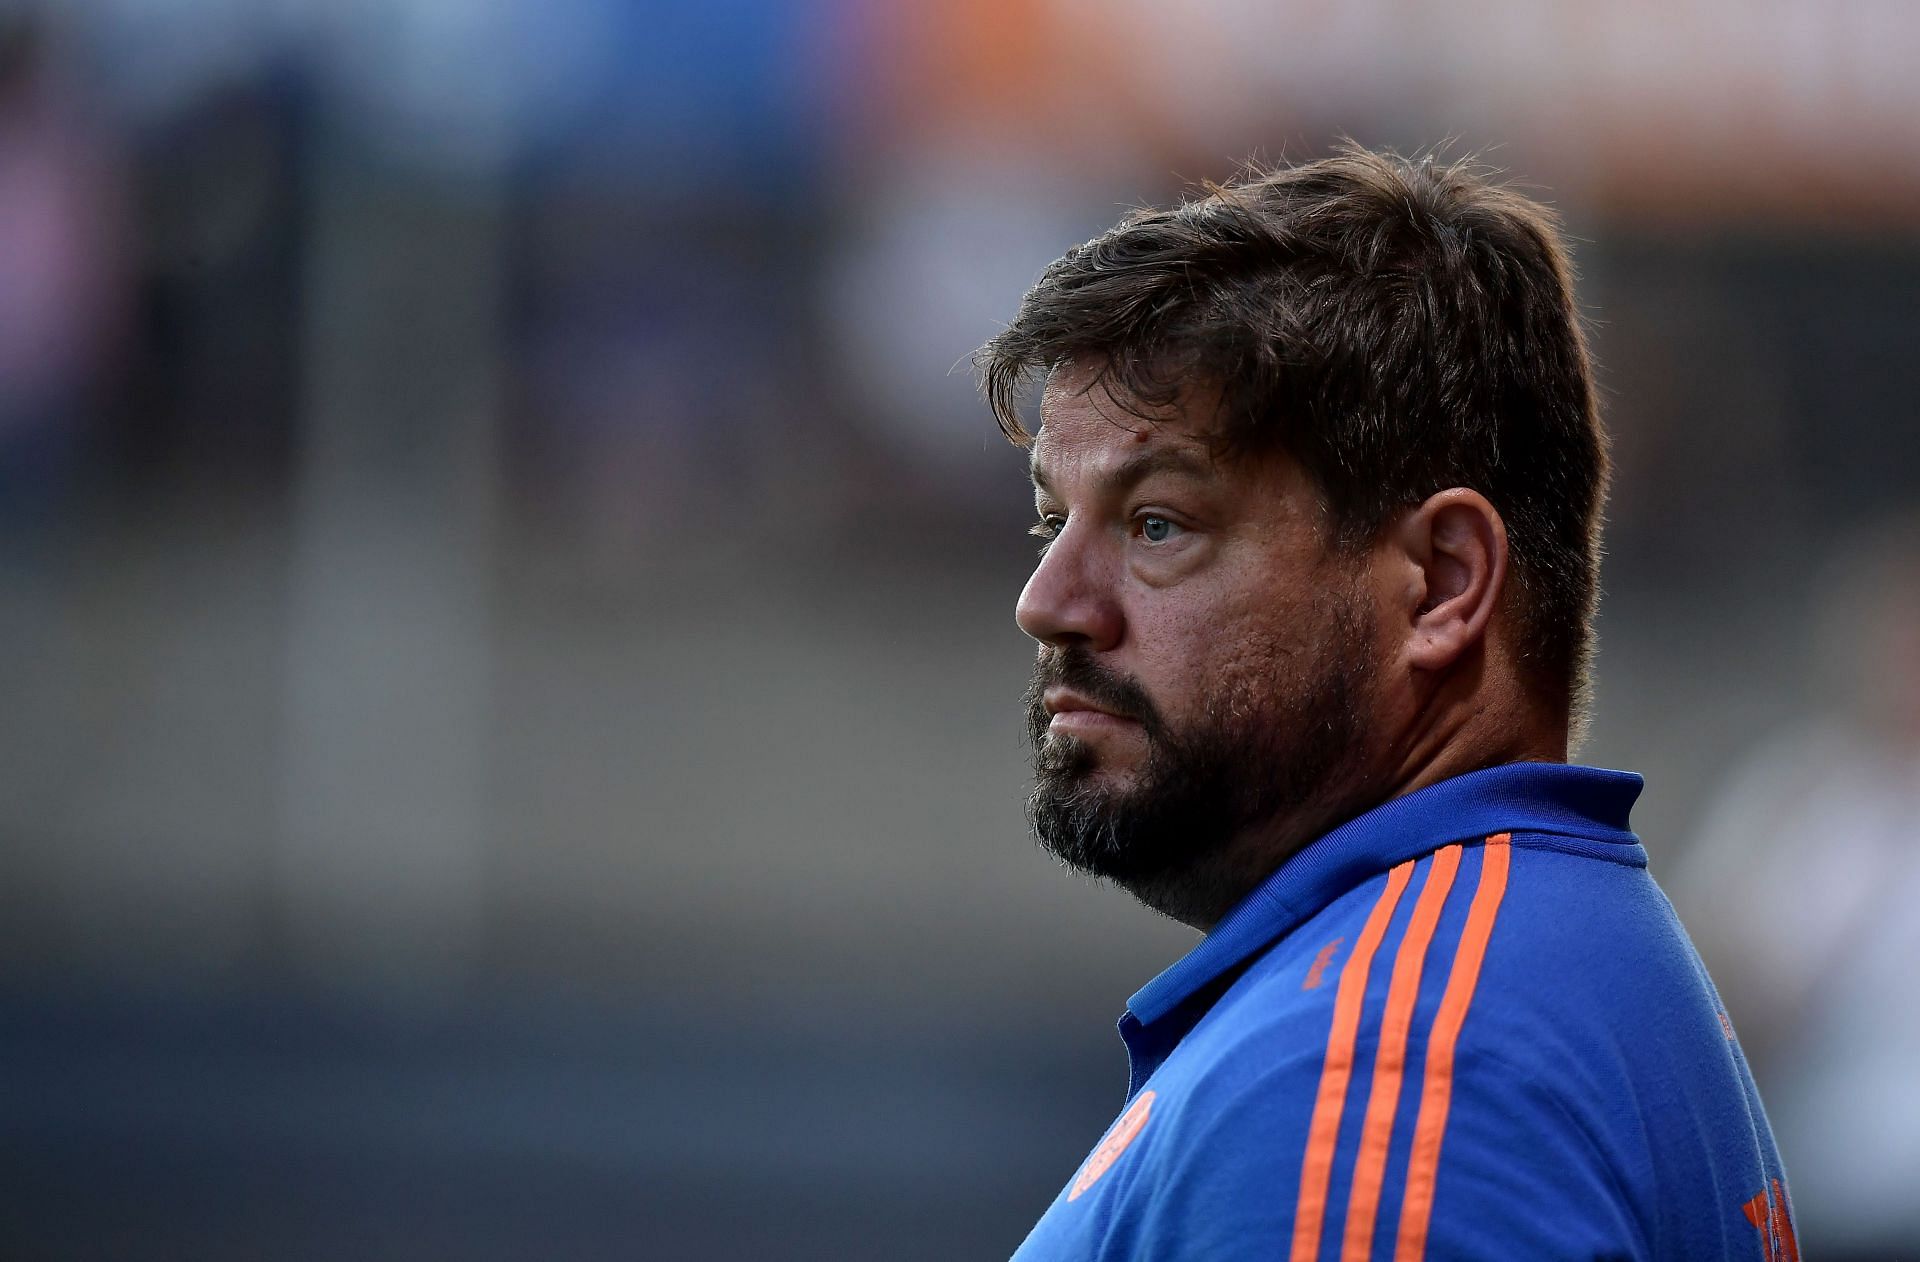 Max Caldas was a disappointed man after his team failed to make a mark